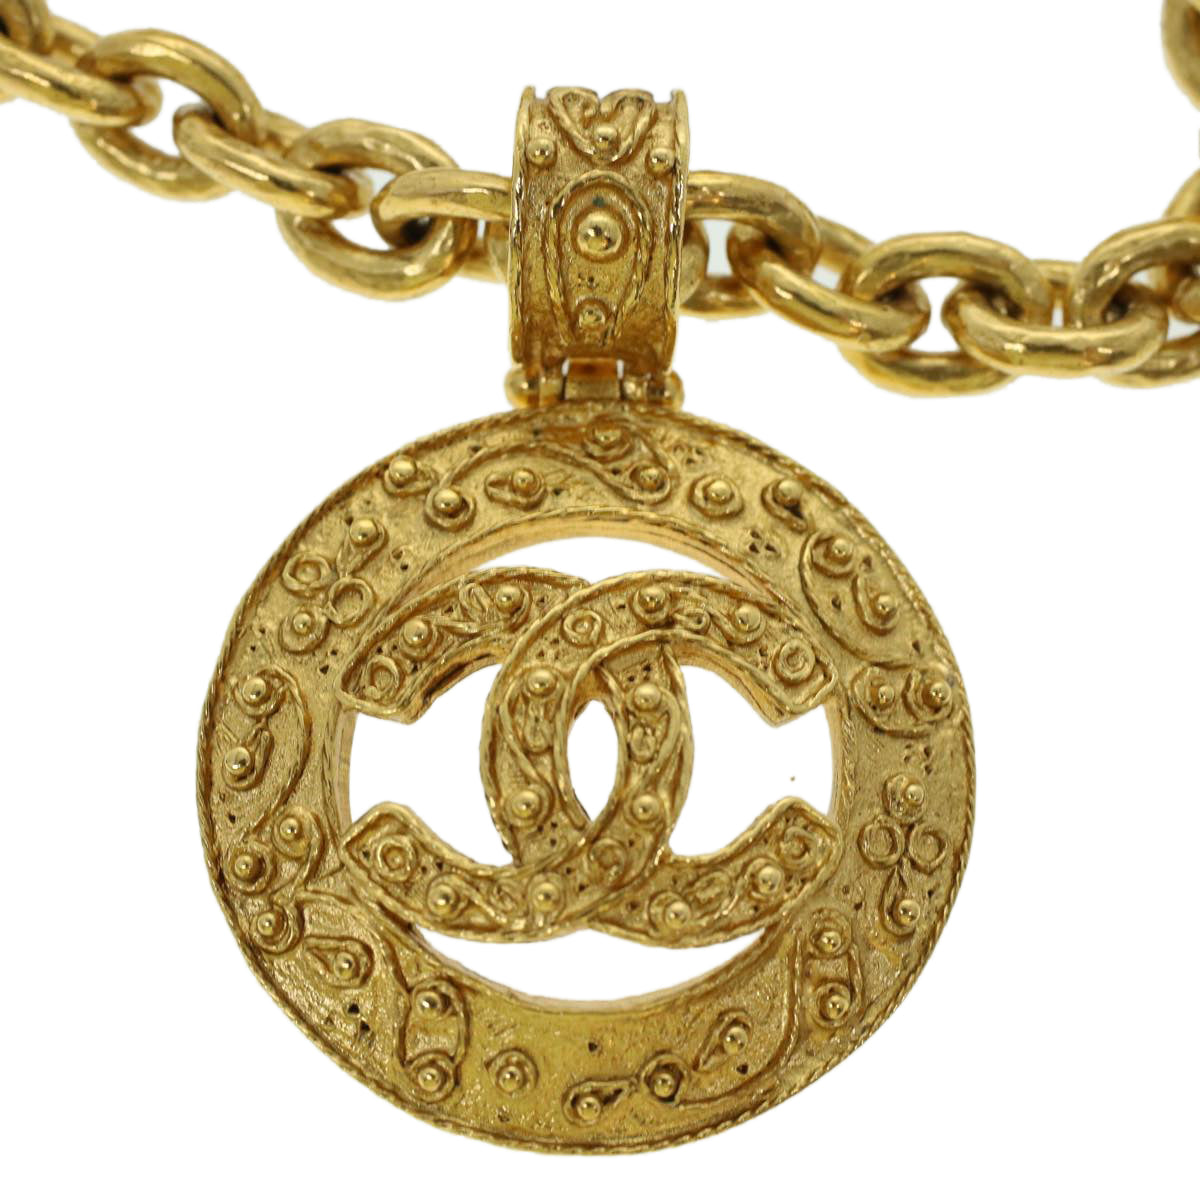 CHANEL Necklace Gold Tone CC Auth 41169A